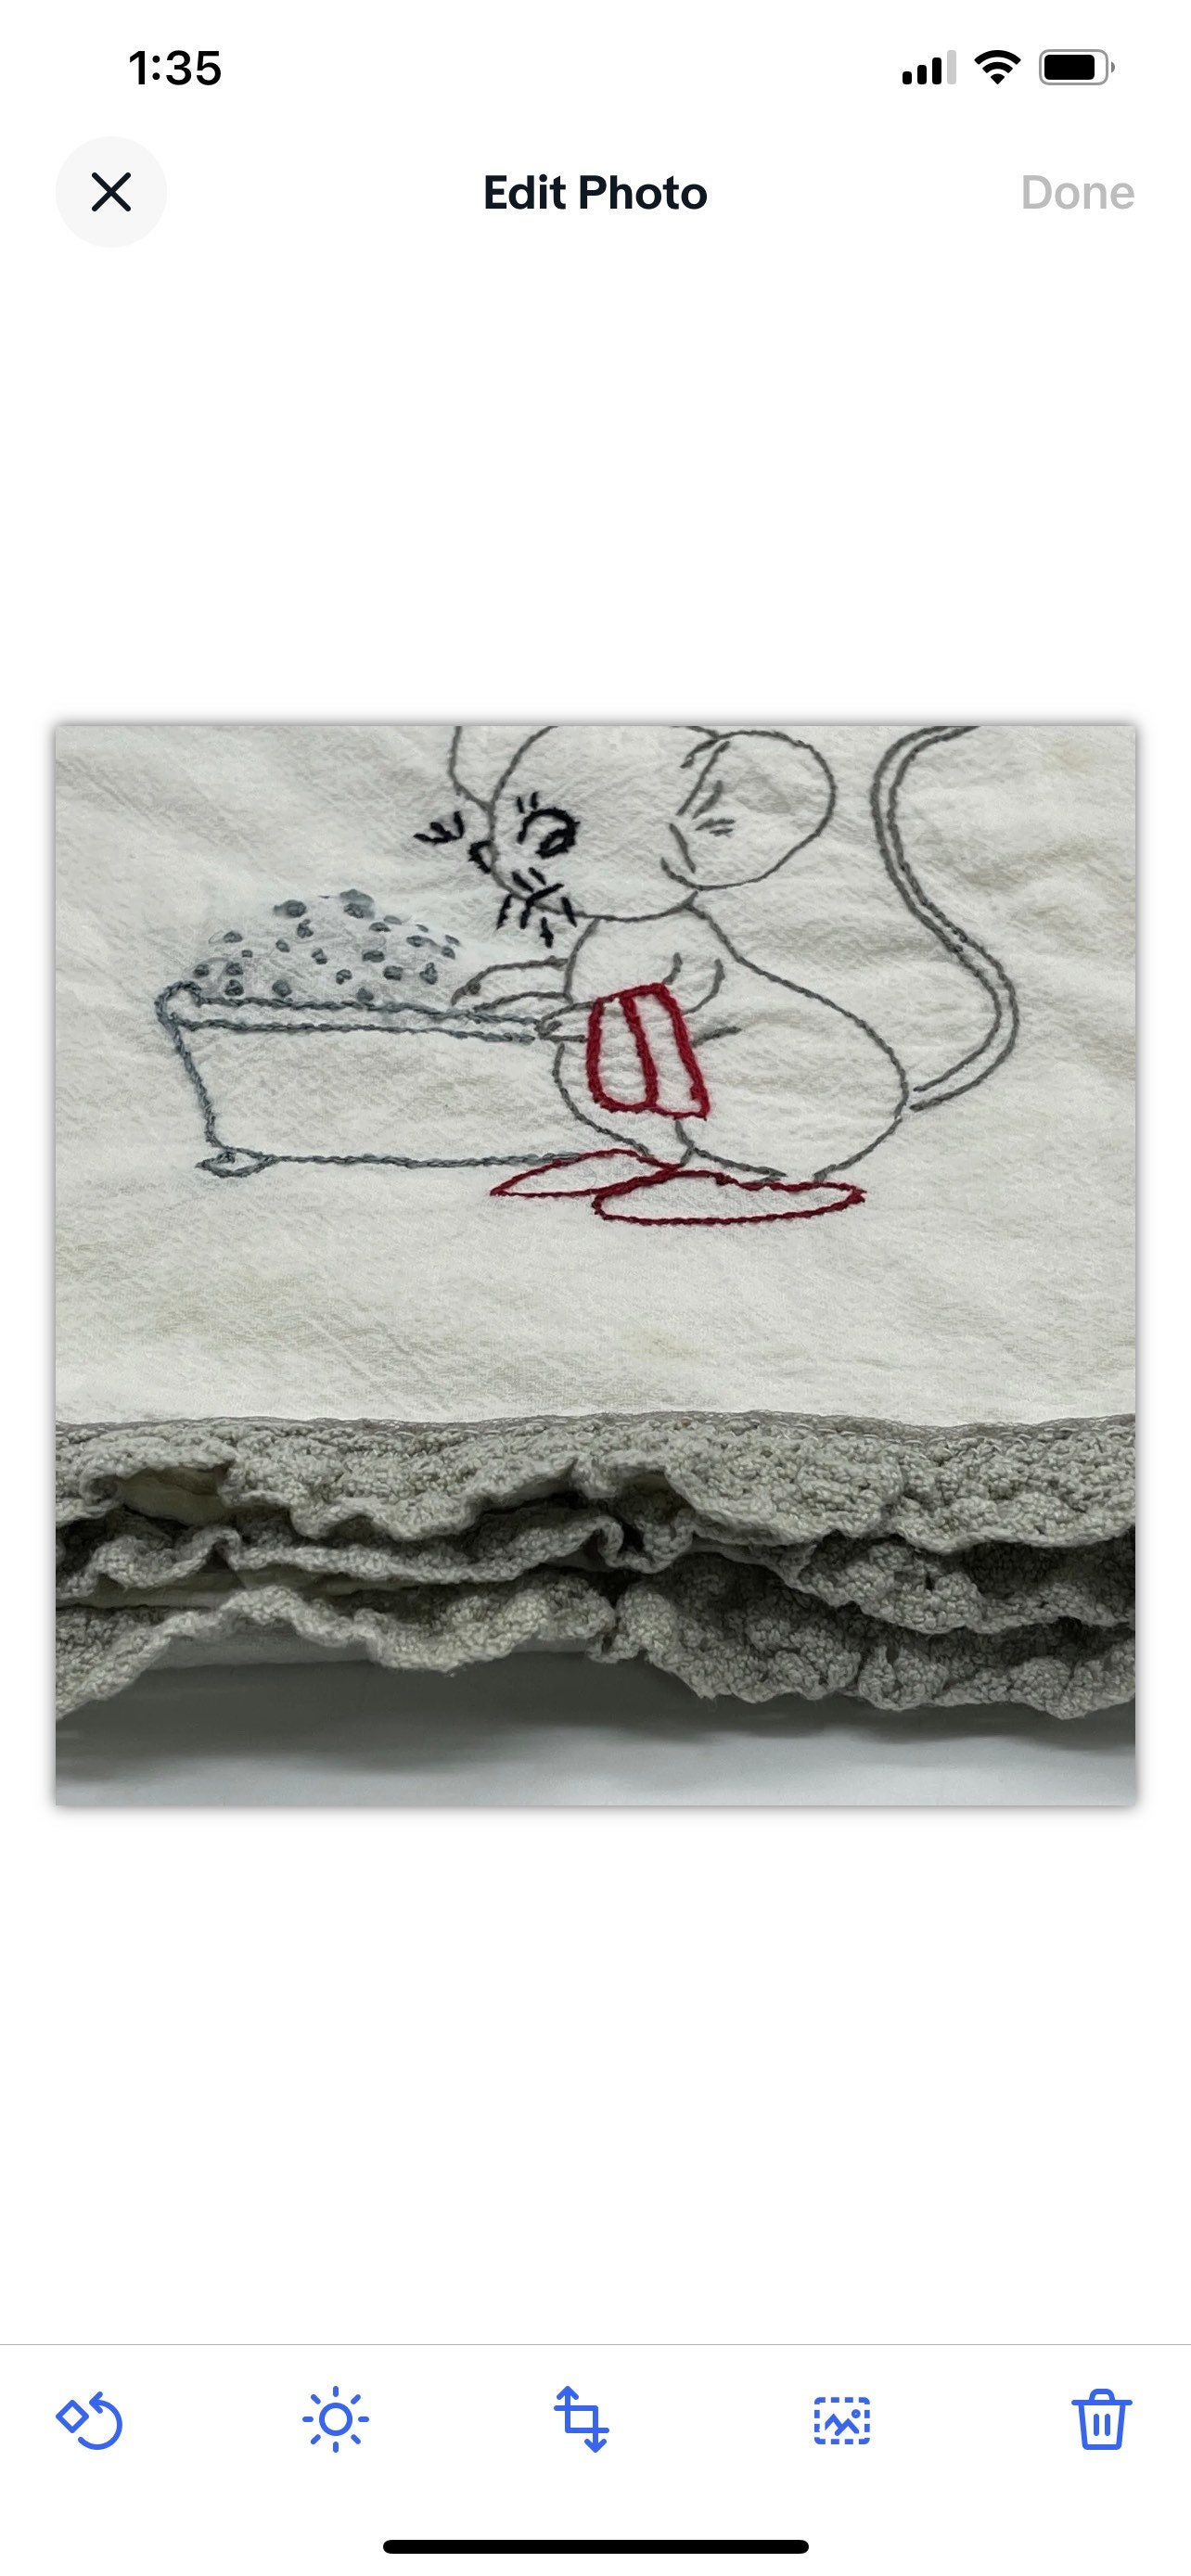 Mice Kitchen Towels — Made Just For U